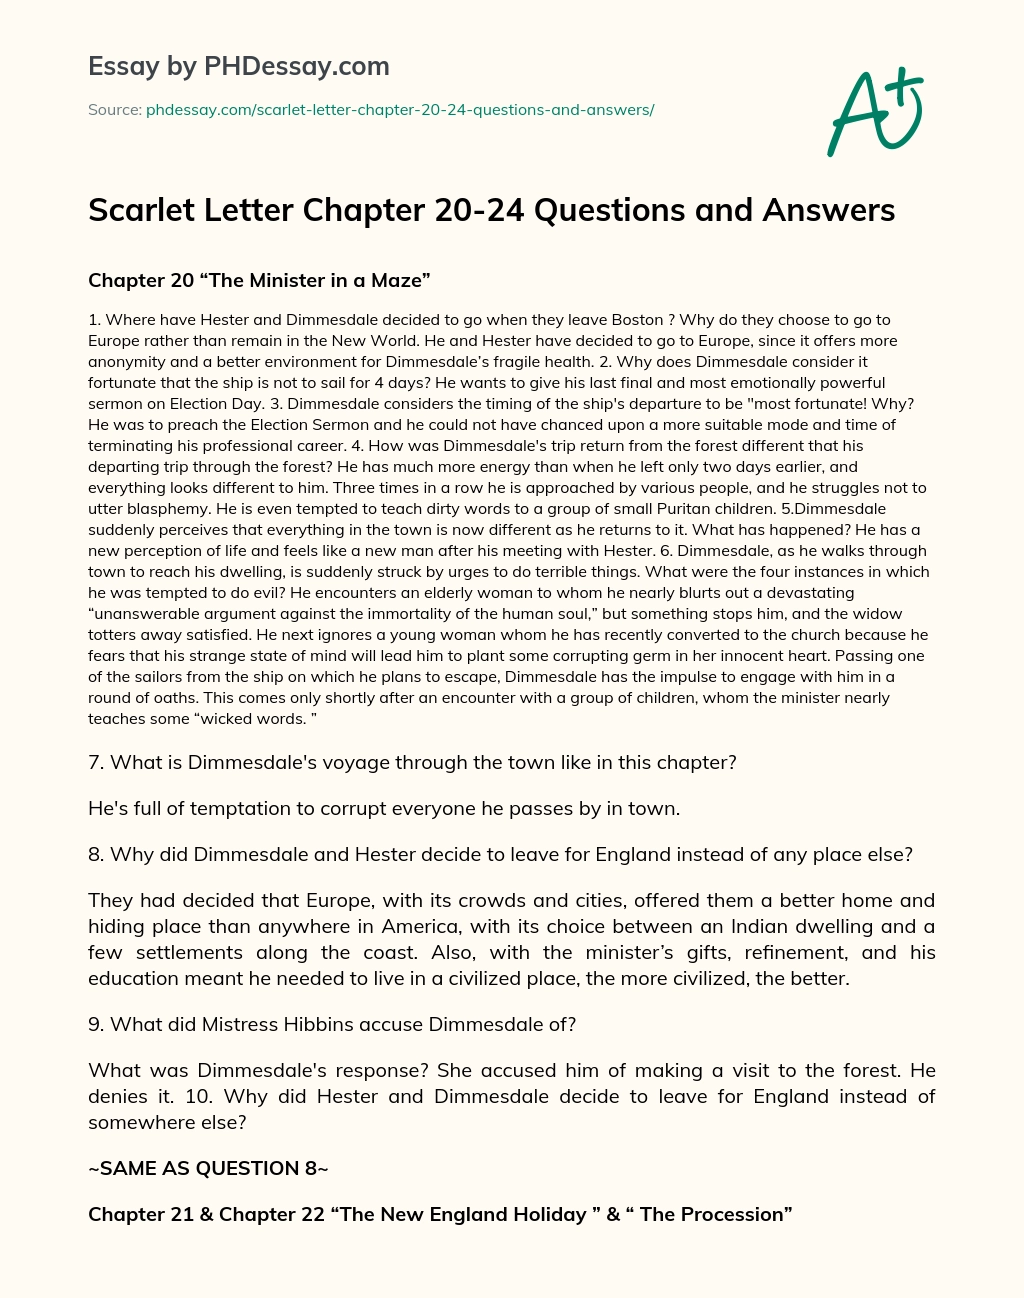 Scarlet Letter Chapter 20-24 Questions and Answers essay